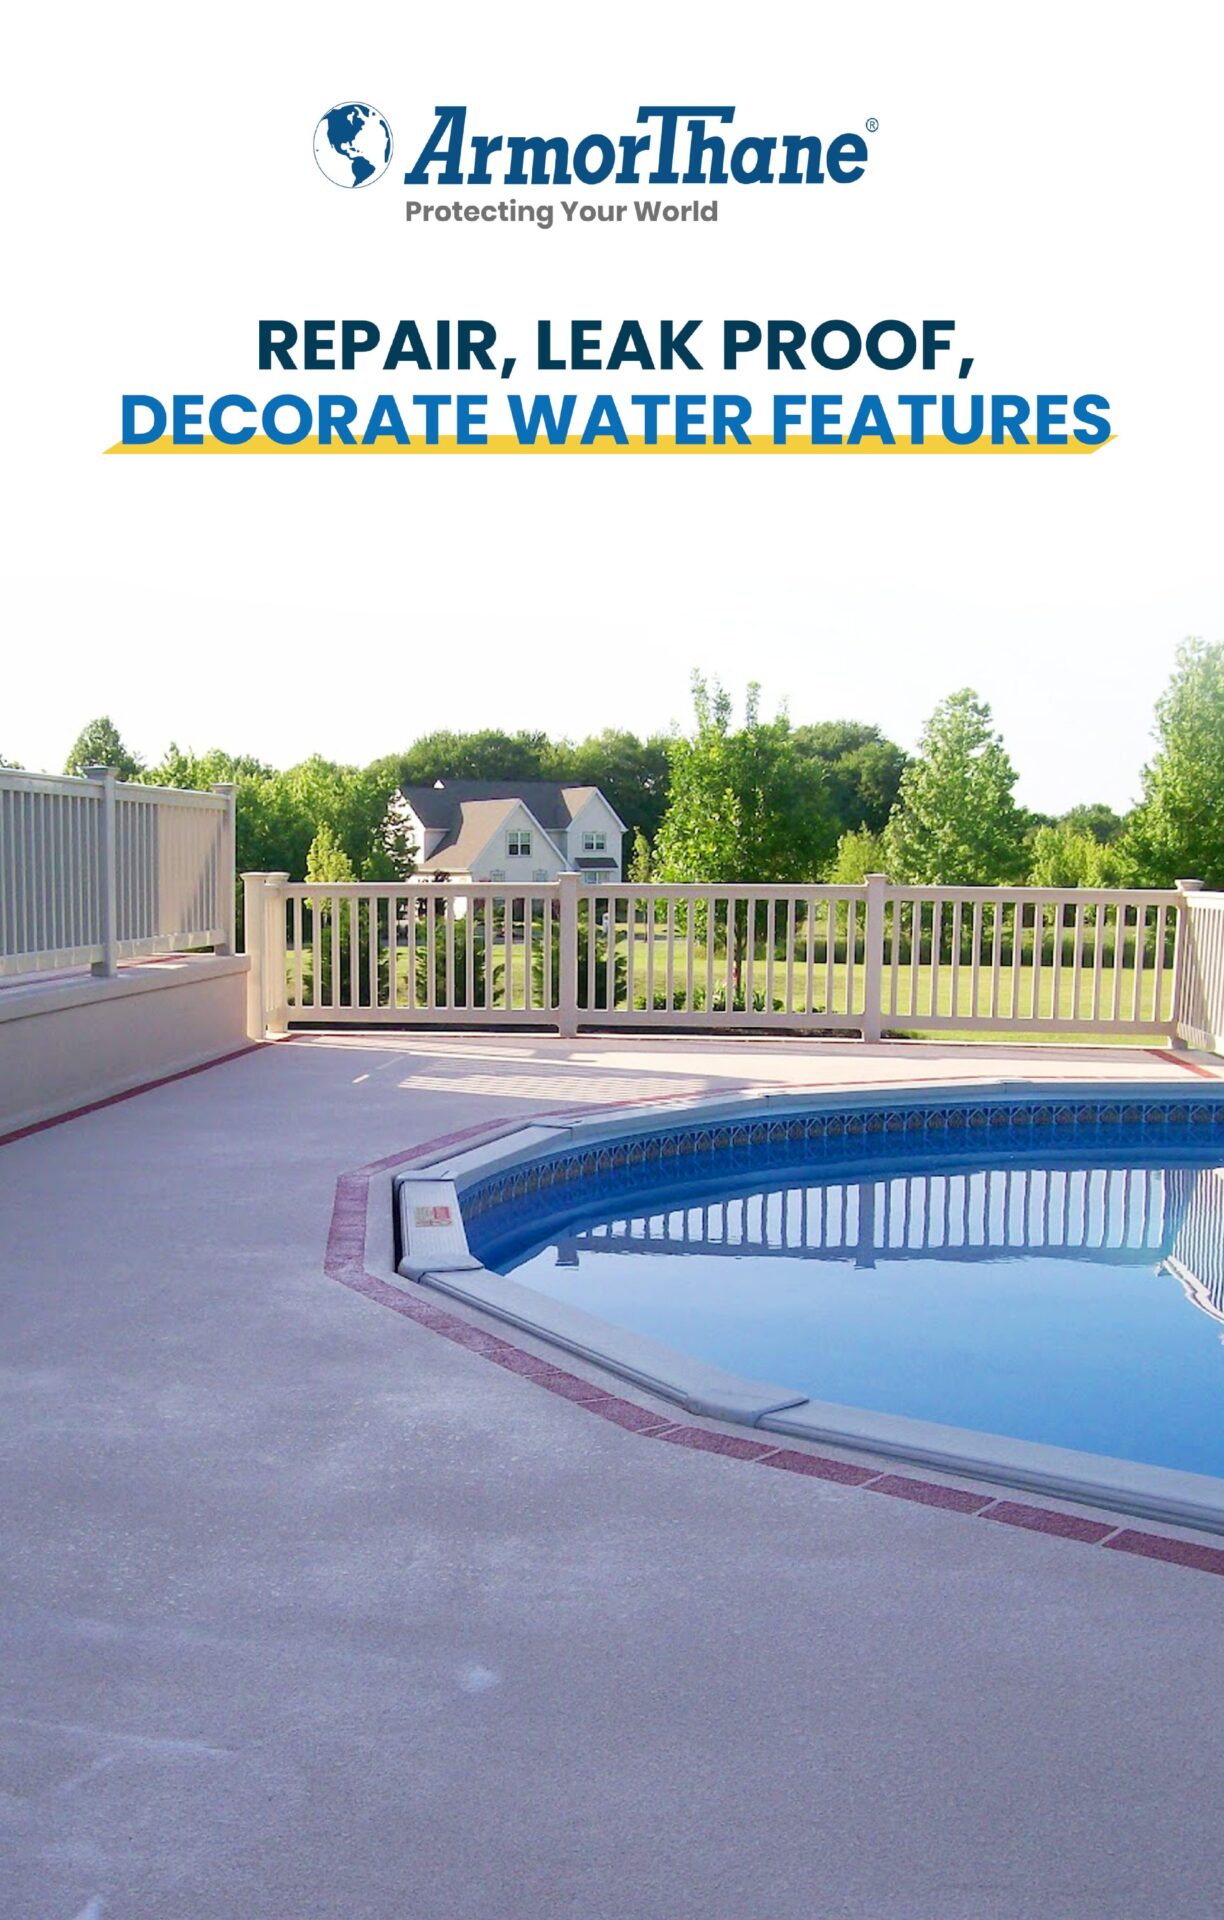 ArmorThane Water Features Brochure 1 pdf min